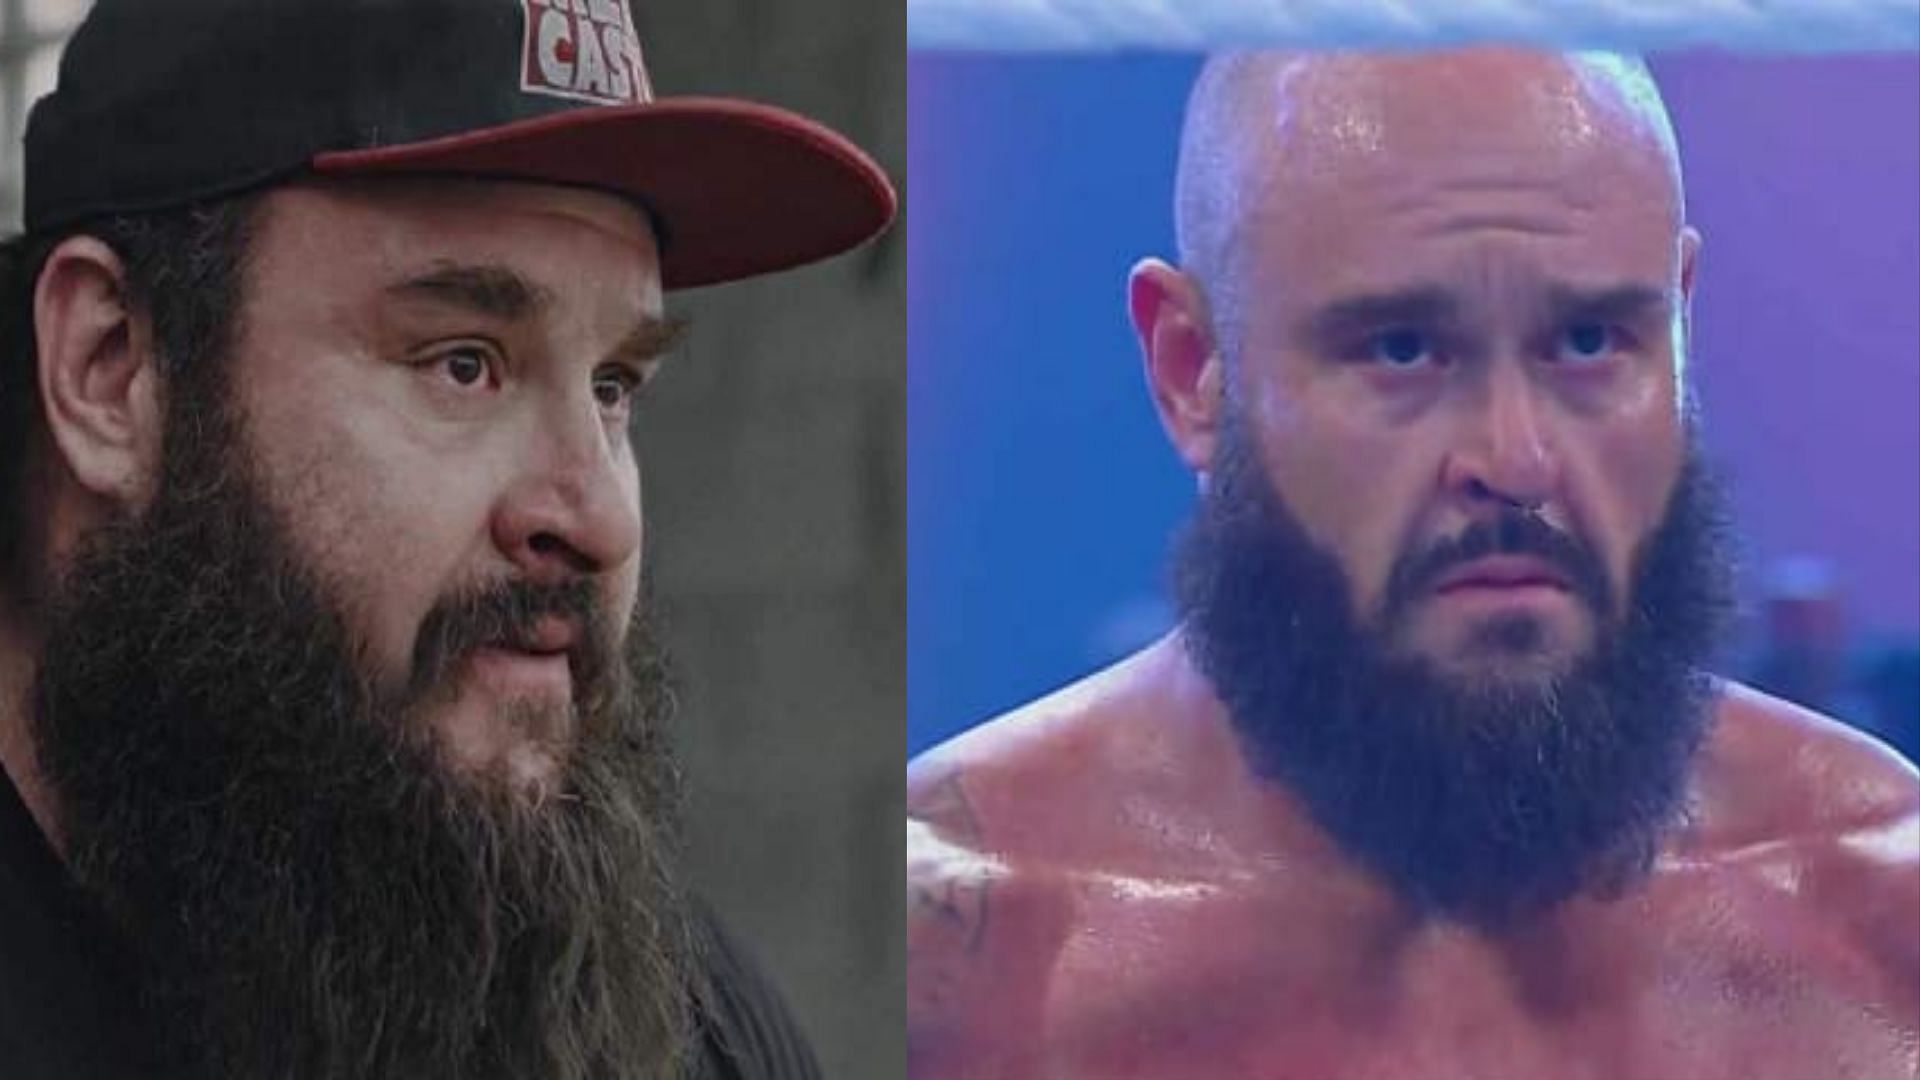 Braun Strowman has always been a force to be reckoned with in WWE